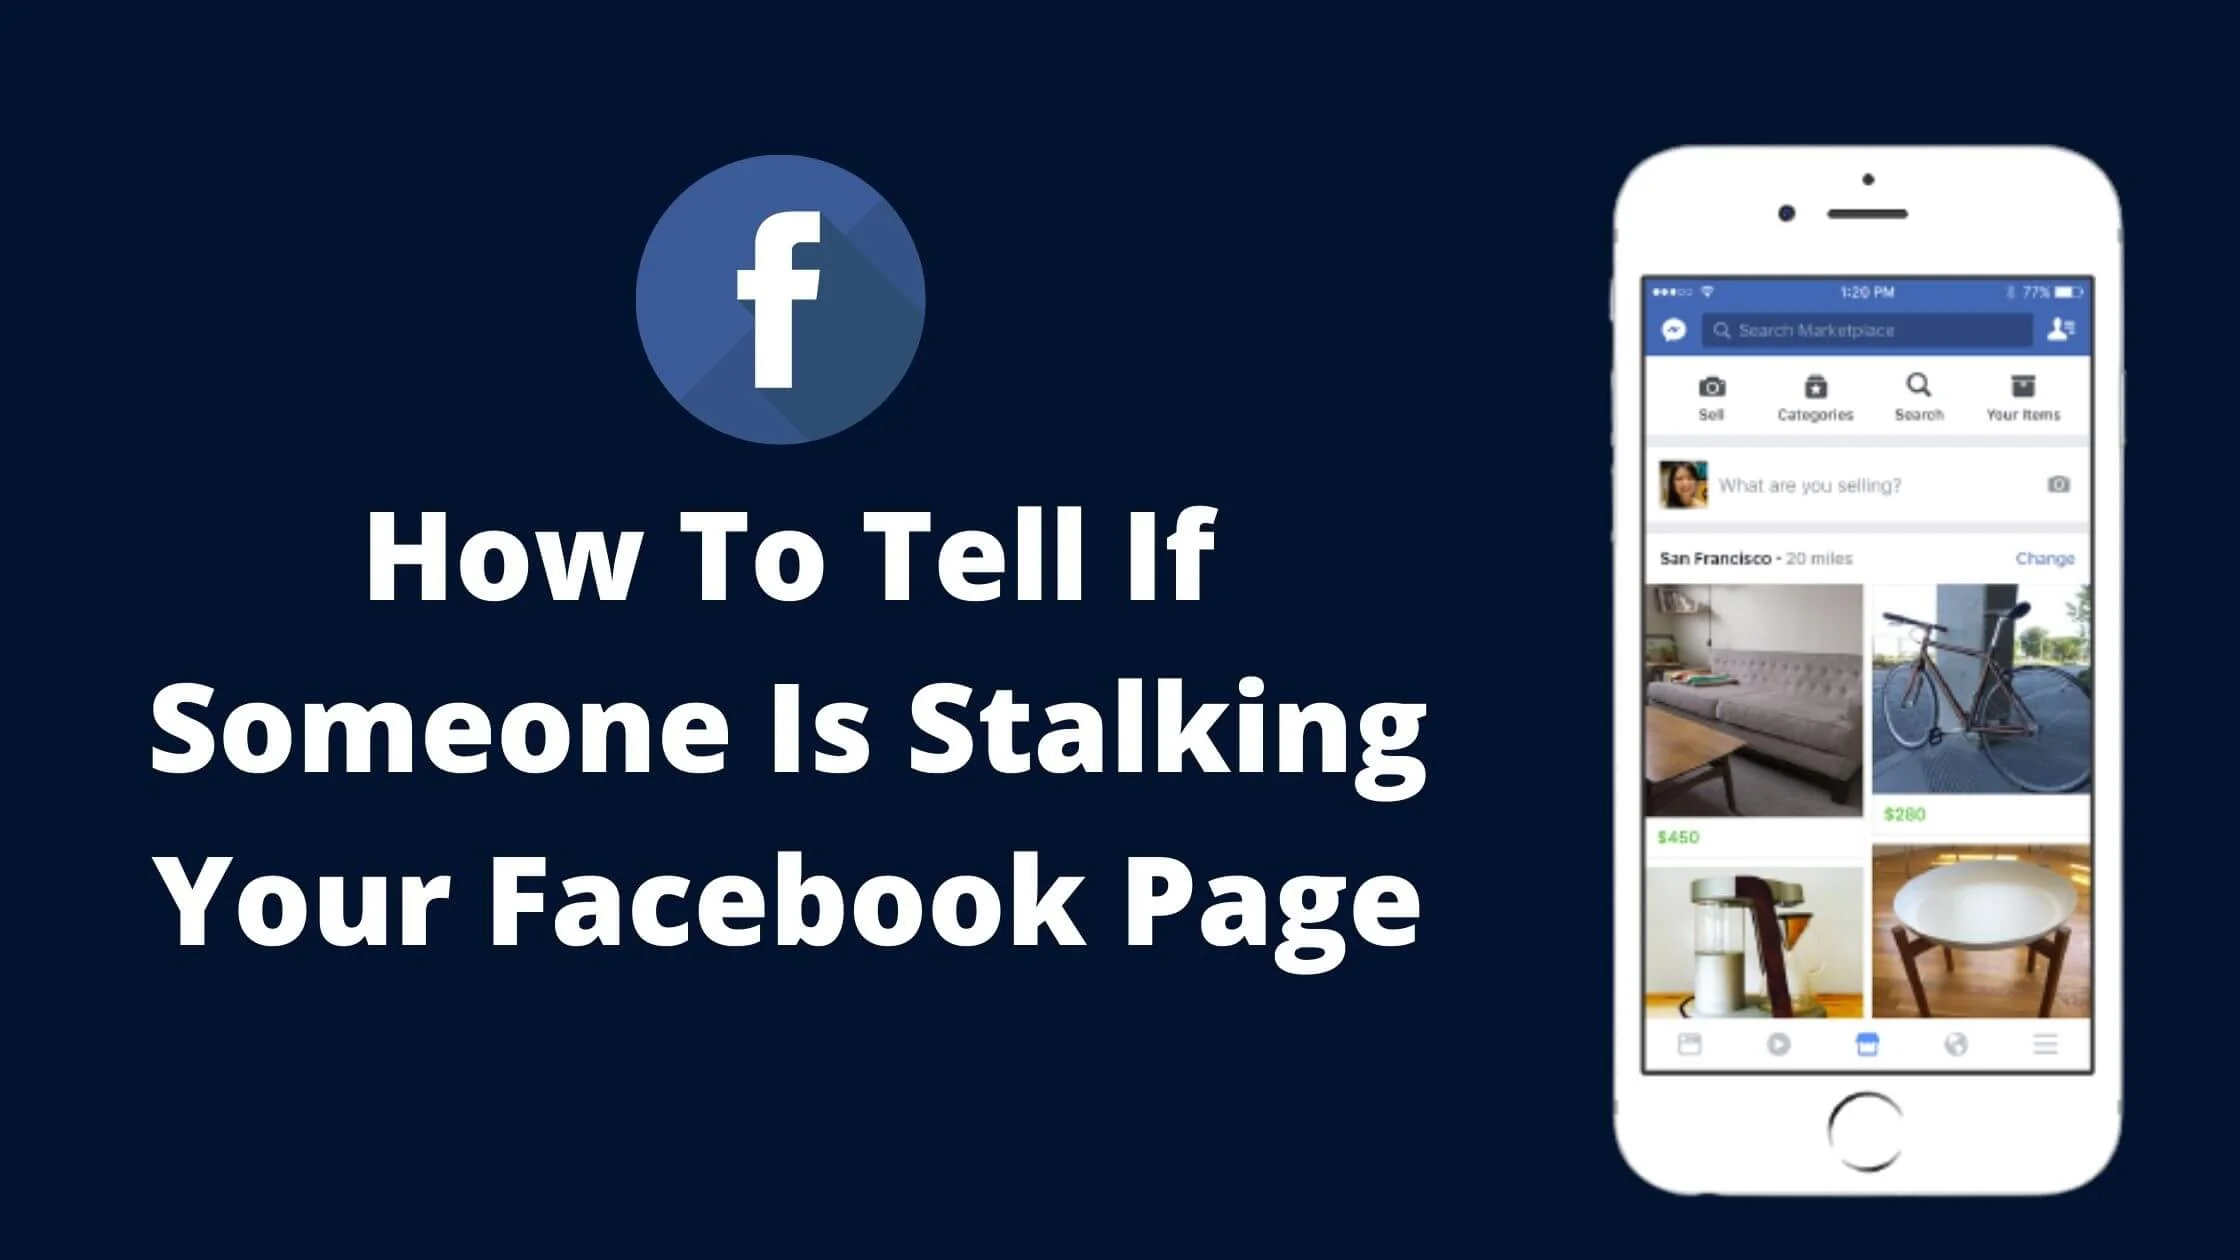 How To Tell If Someone Is Stalking Your Facebook Page